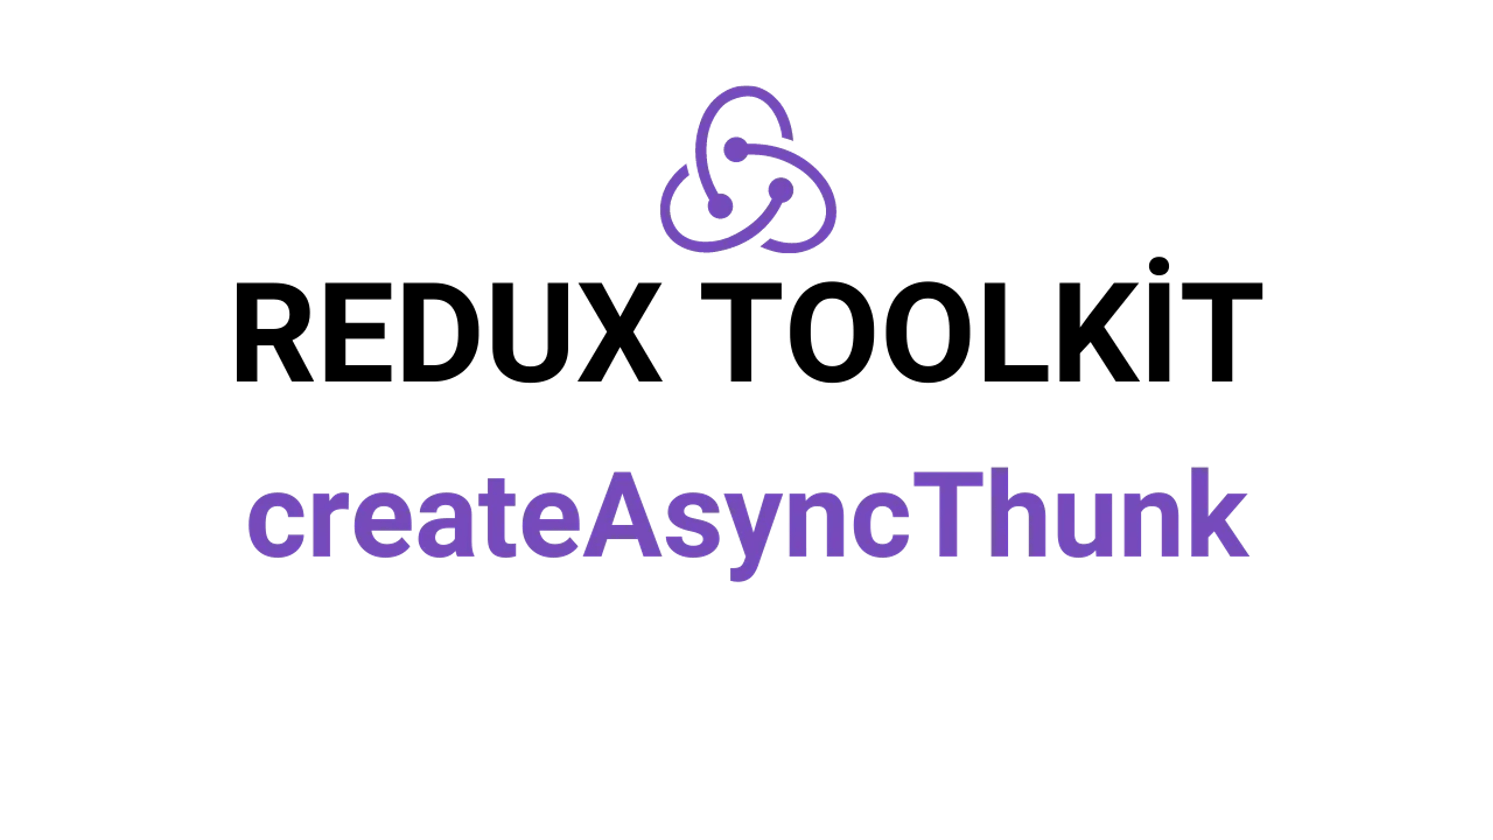 Async Operations in Redux with the Redux Toolkit Thunk